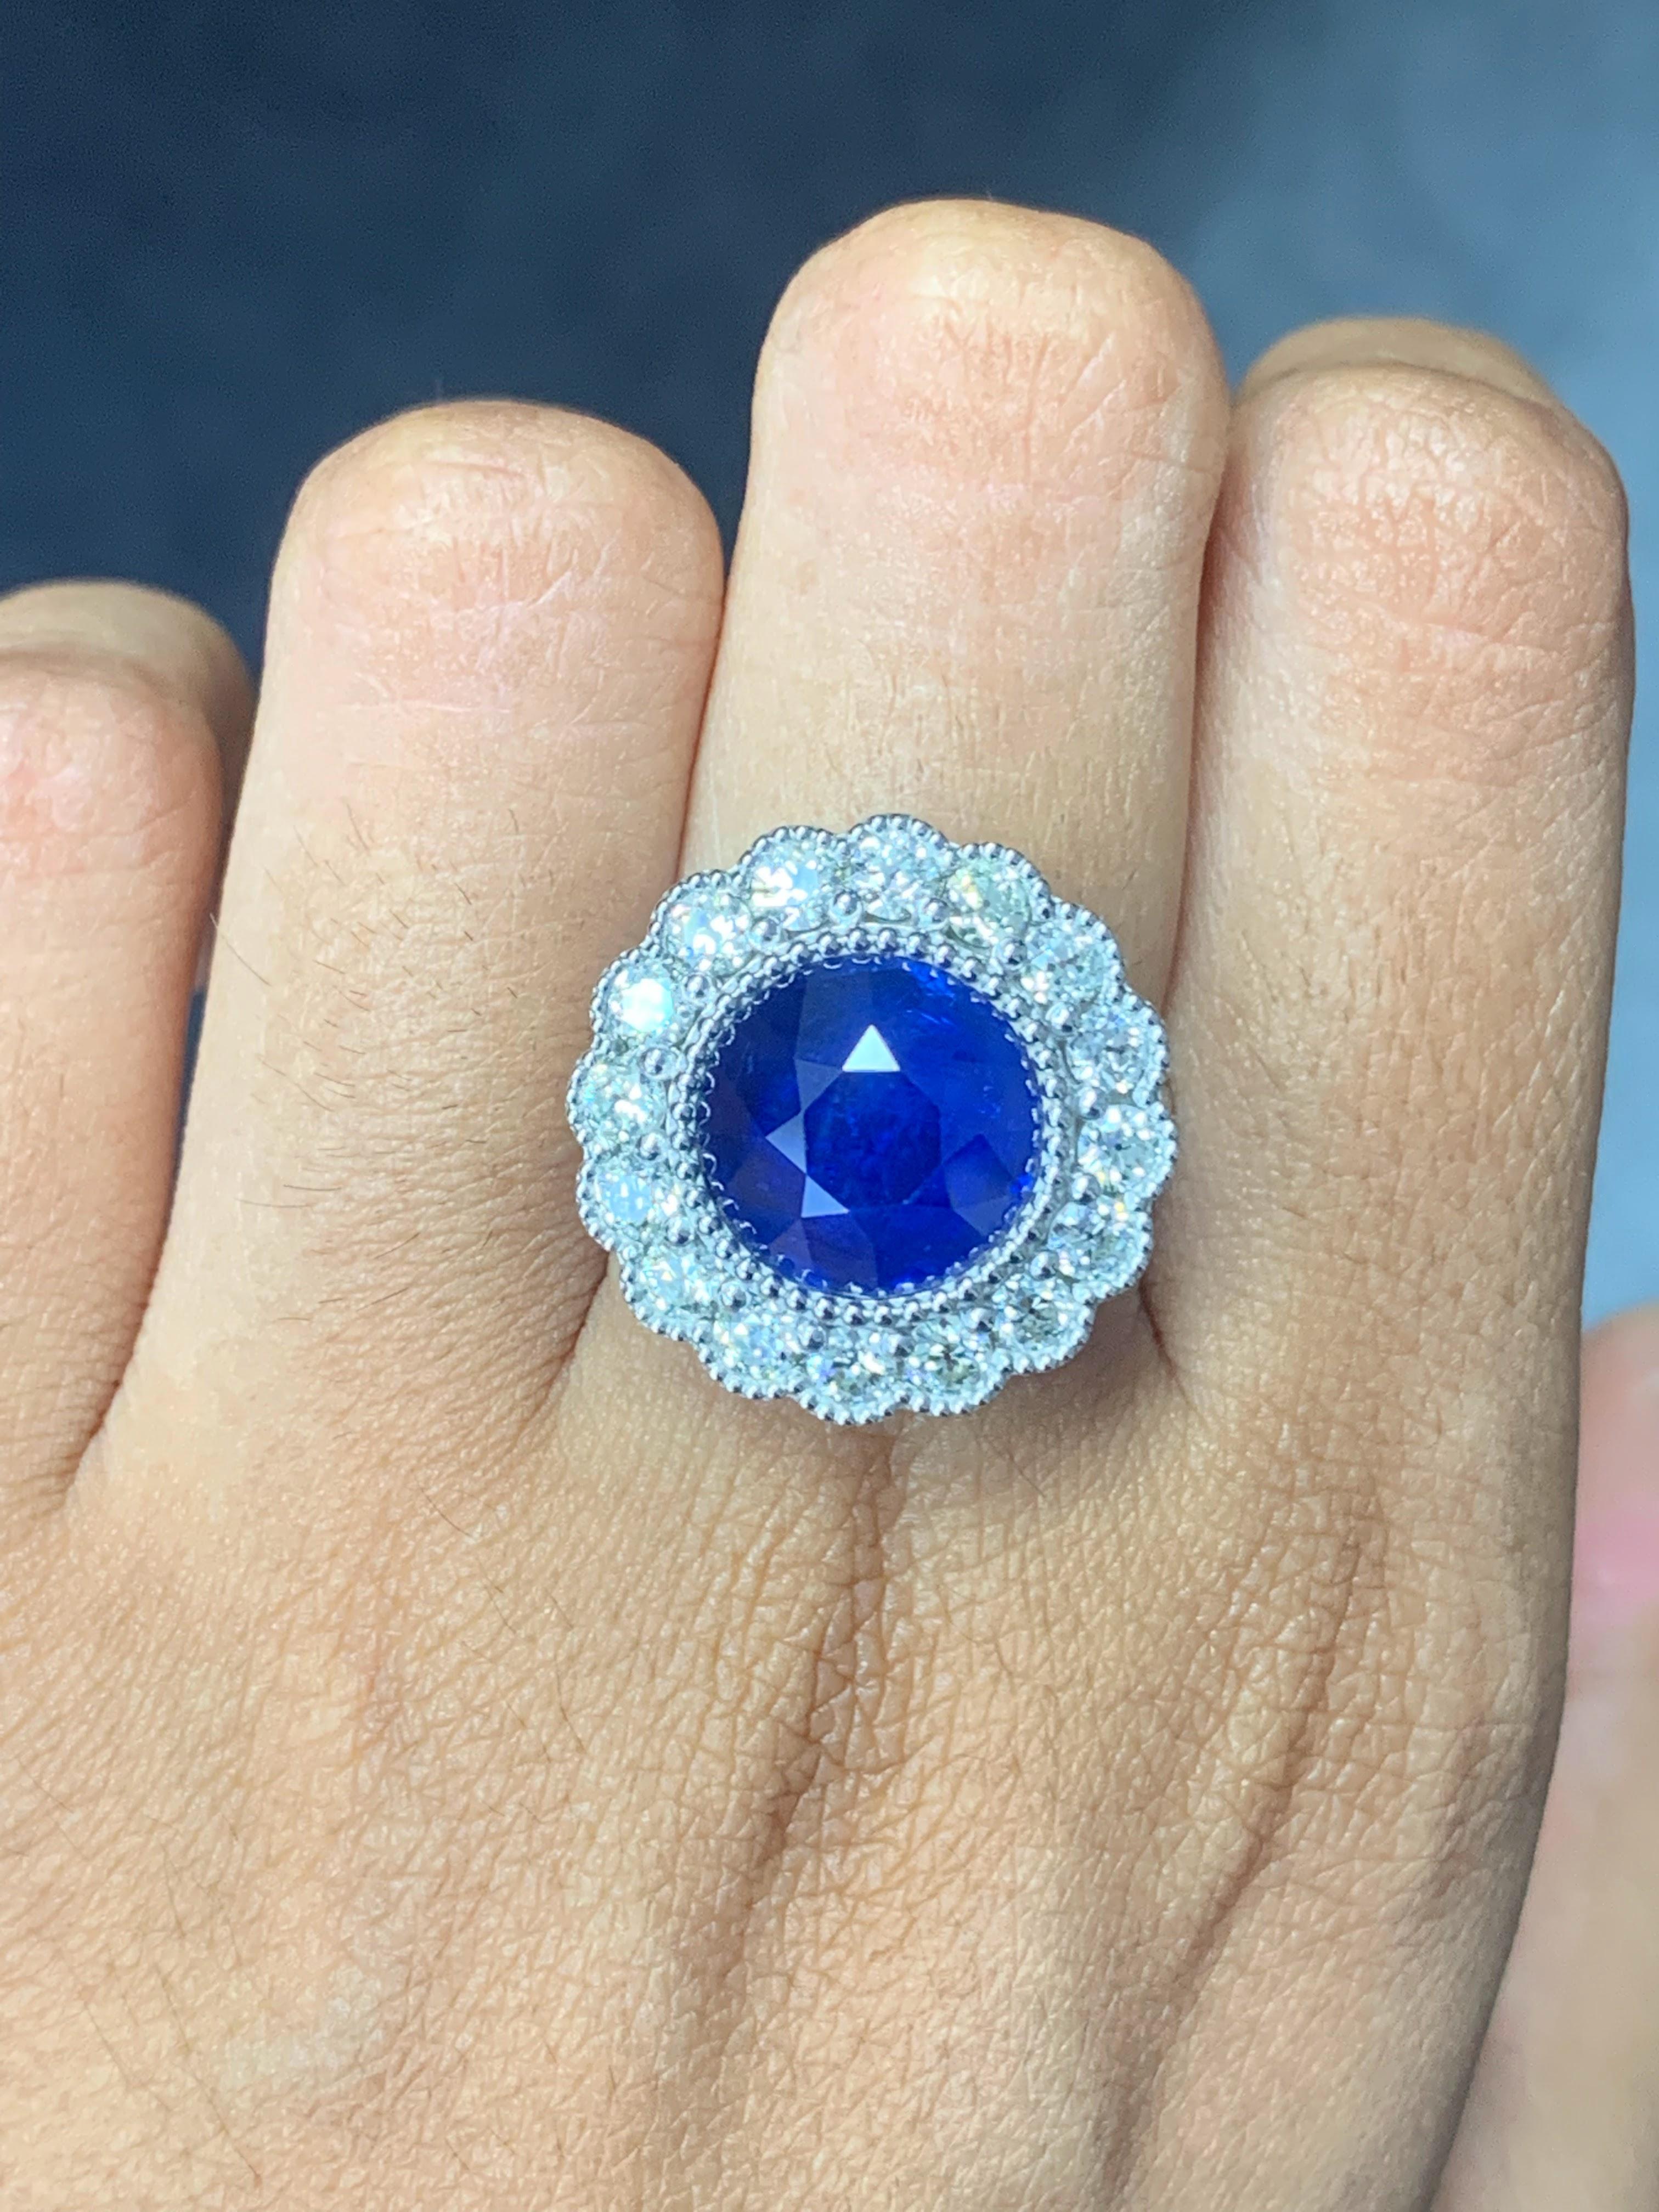 6.52 Ct Round Ceylon Sapphire Ring with Old Mine Cut Diamonds in 18K White Gold For Sale 3